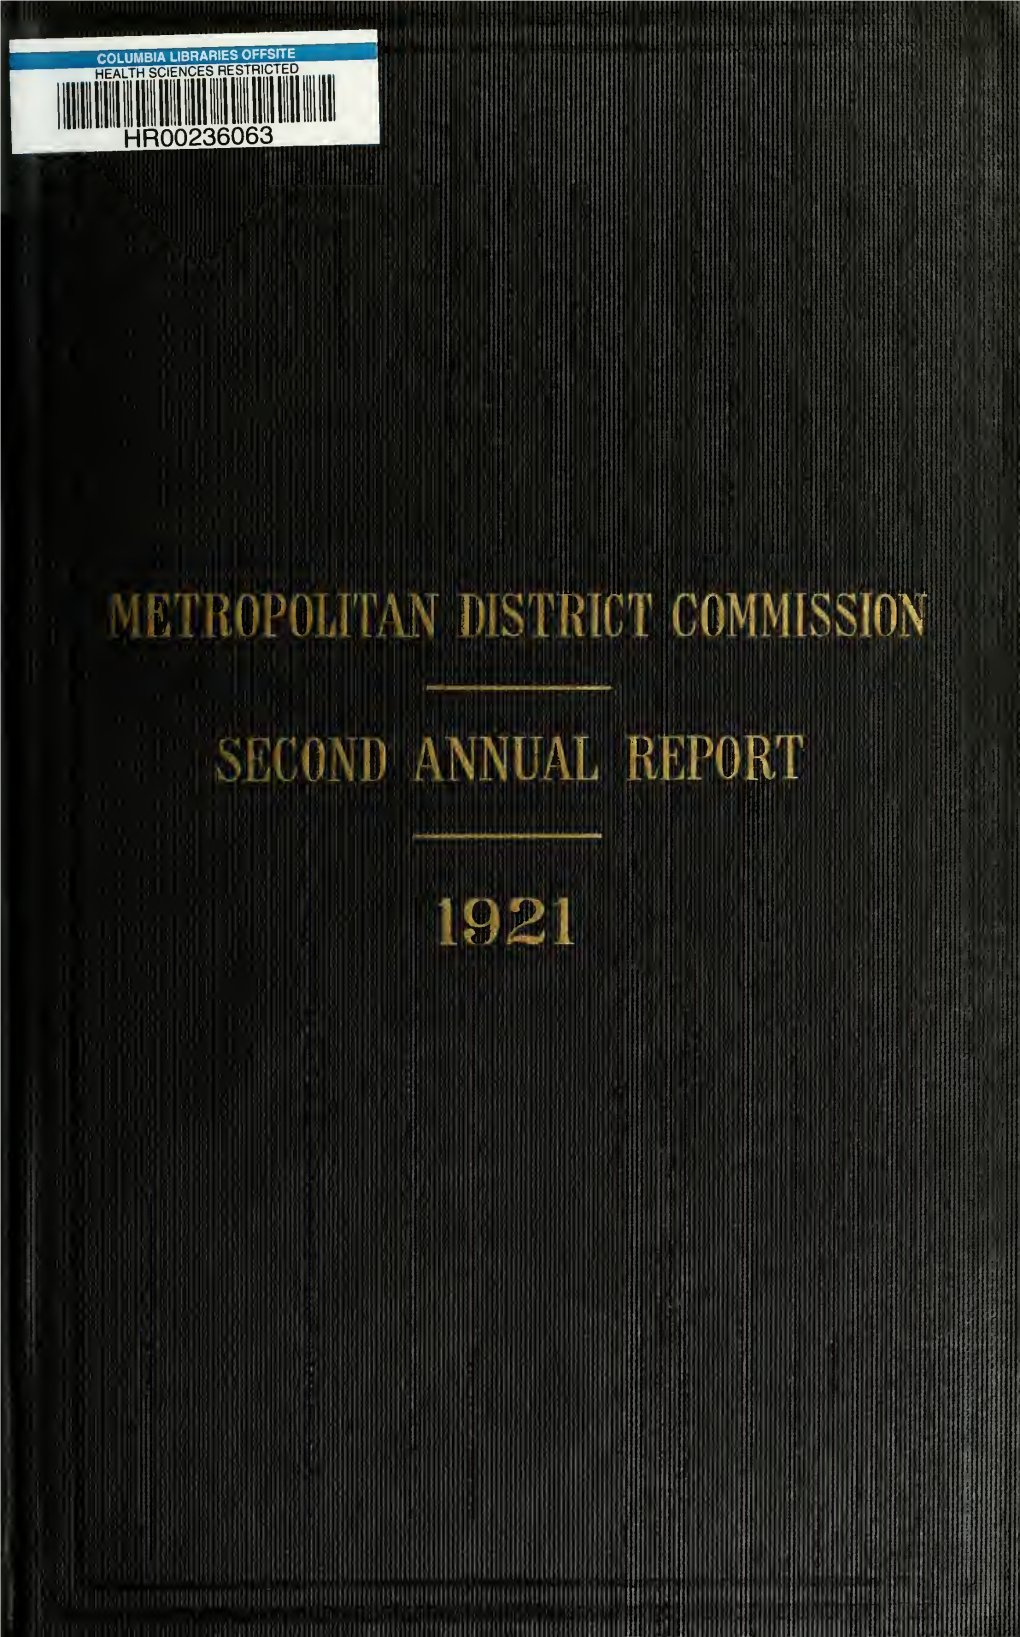 Annual Report of the Metropolitan District Commission